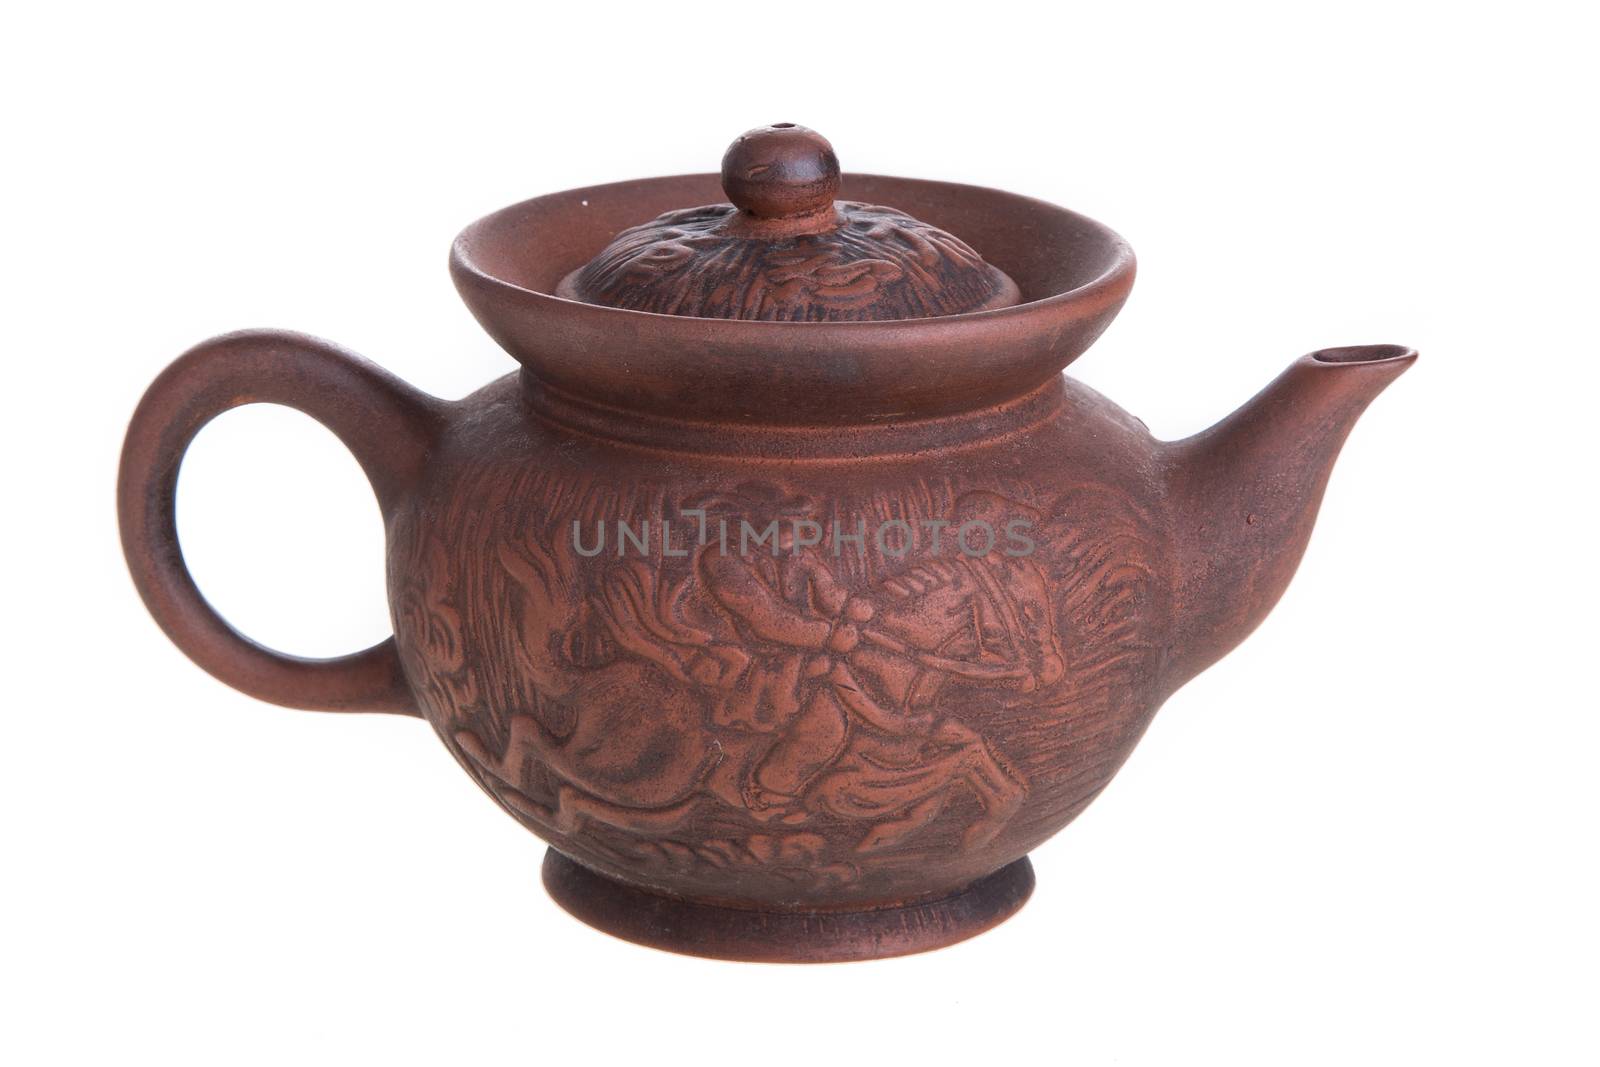 Traditional Chinese clay teapot isolated on white background.